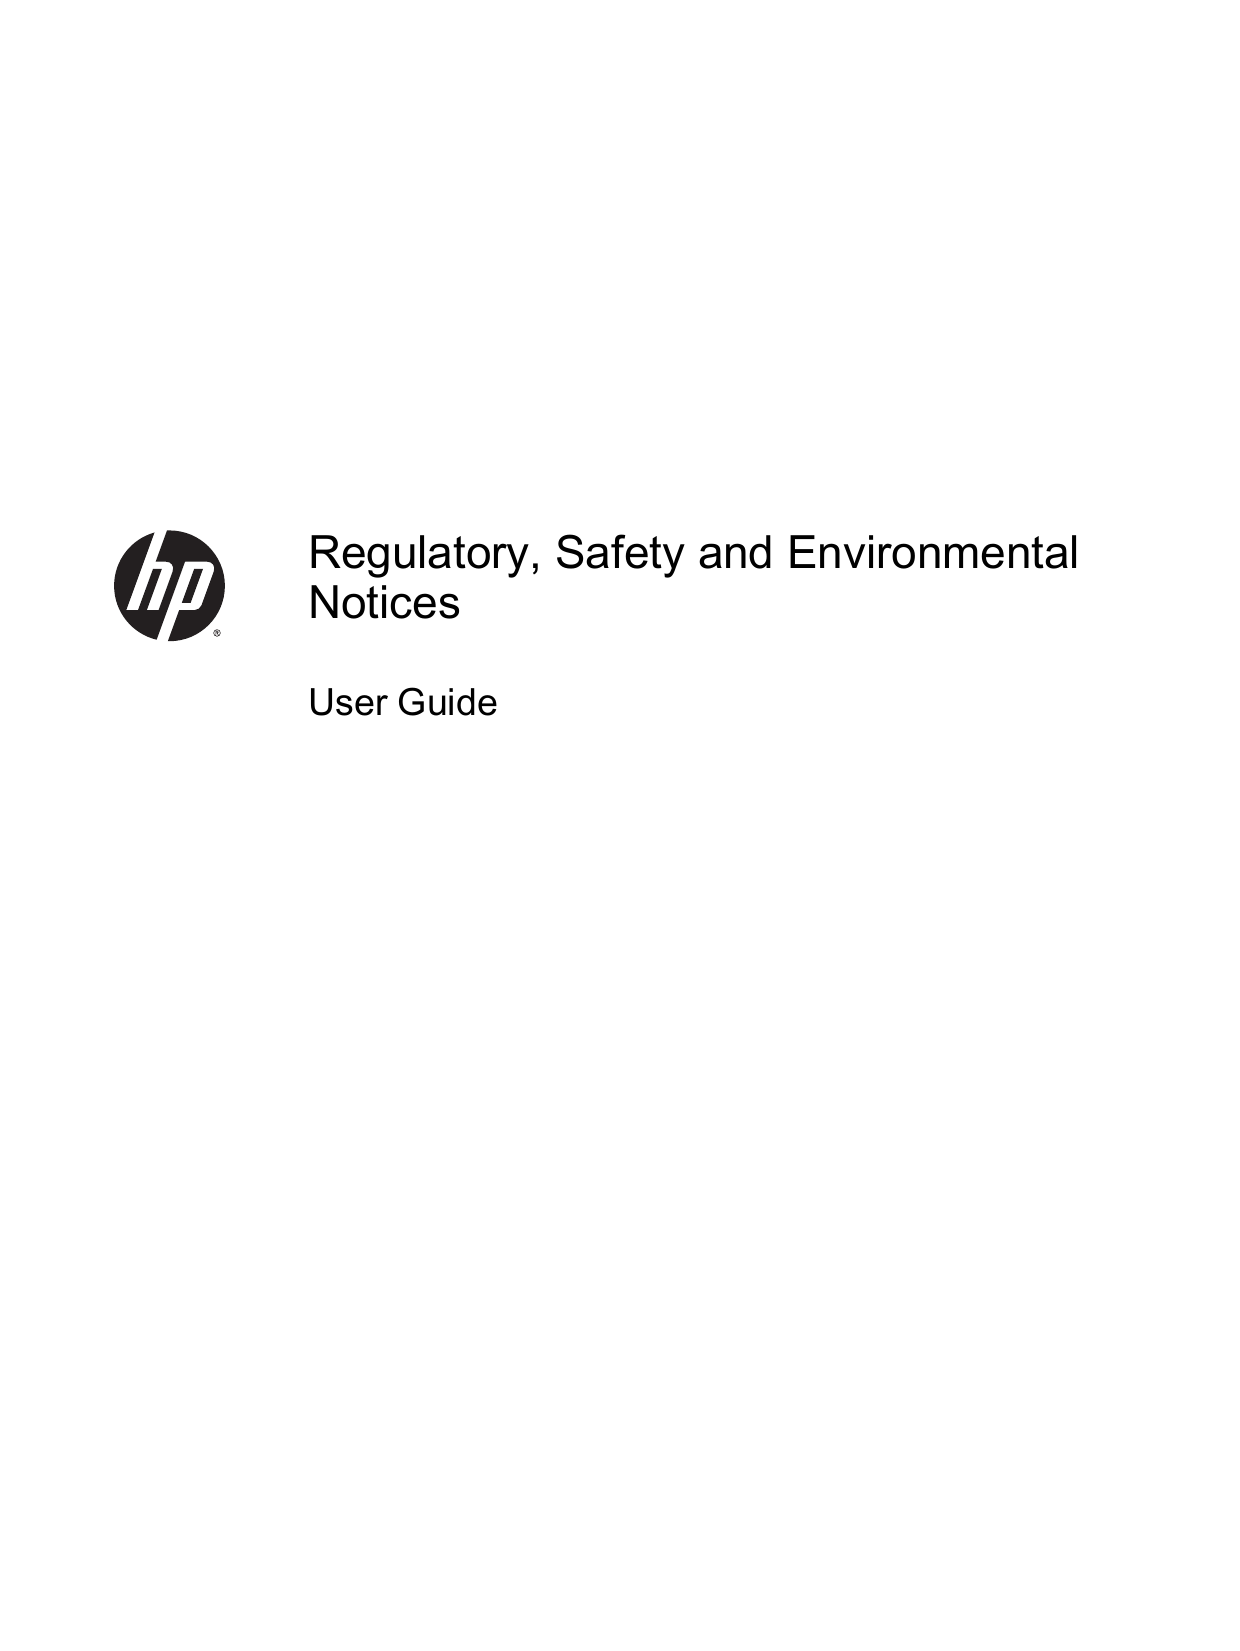 Regulatory, Safety and Environmental NoticesUser Guide